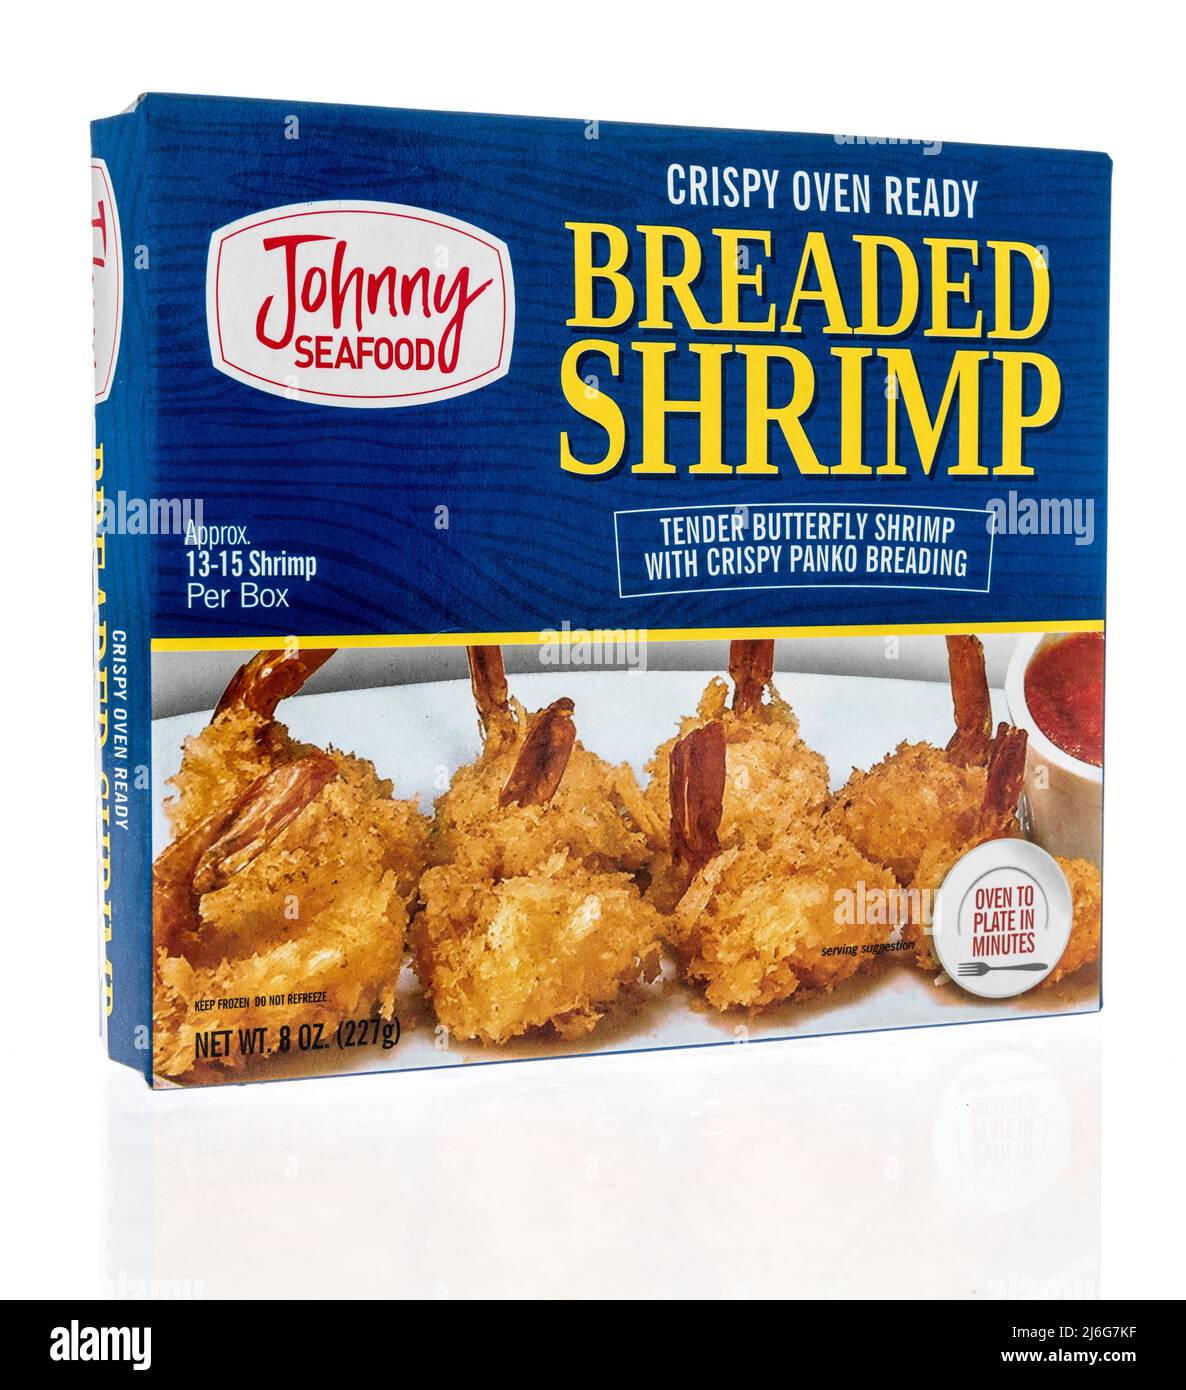 Winneconne, WI -23 April 2022: A package of Johnny seafood breaded shrimp on an isolated background Stock Photo